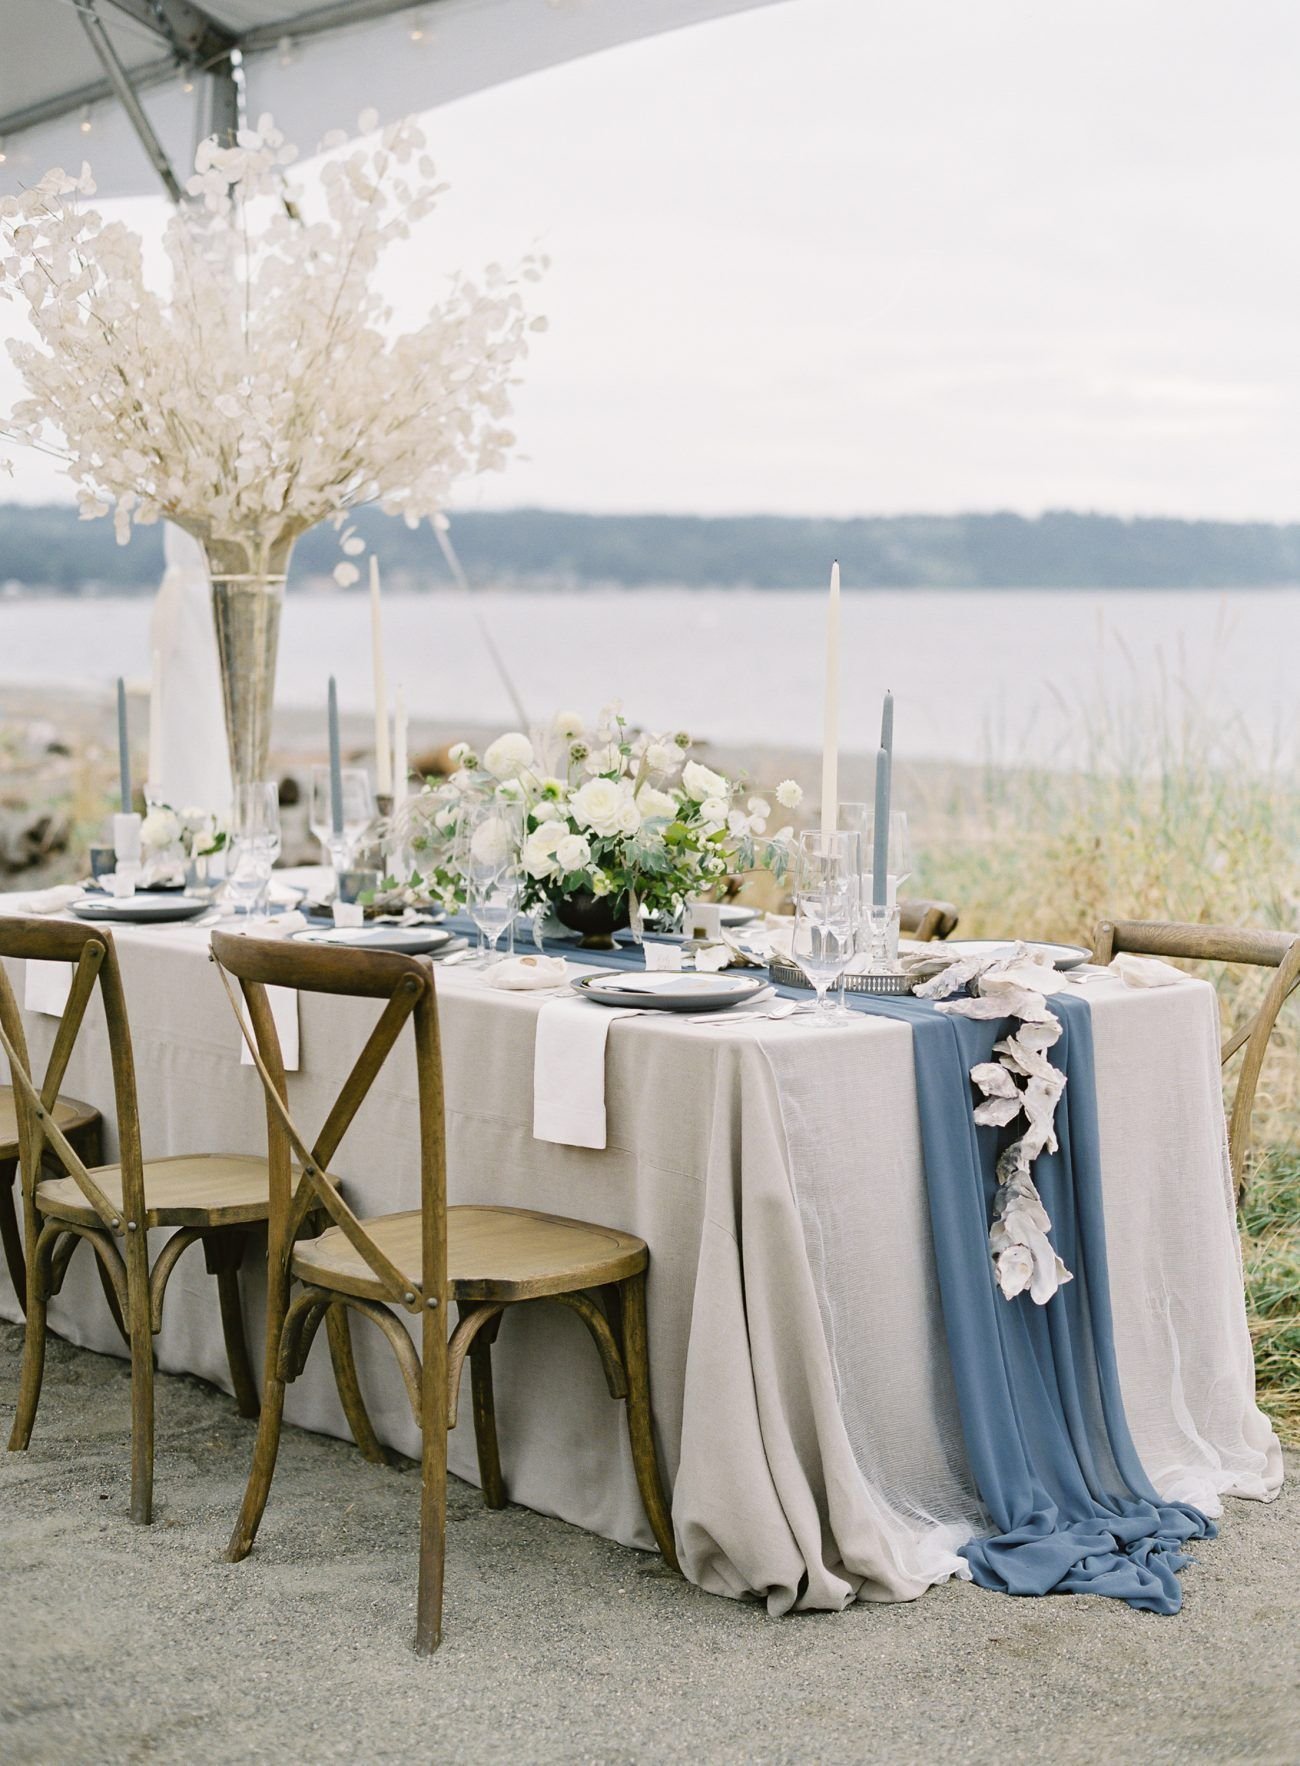 Dan and Kaitlin Say I Do in a Sand and Sea Inspired Coastal Wedding Styled With Shades of Blue and Fresh Neutrals  - Once Wed.jpg